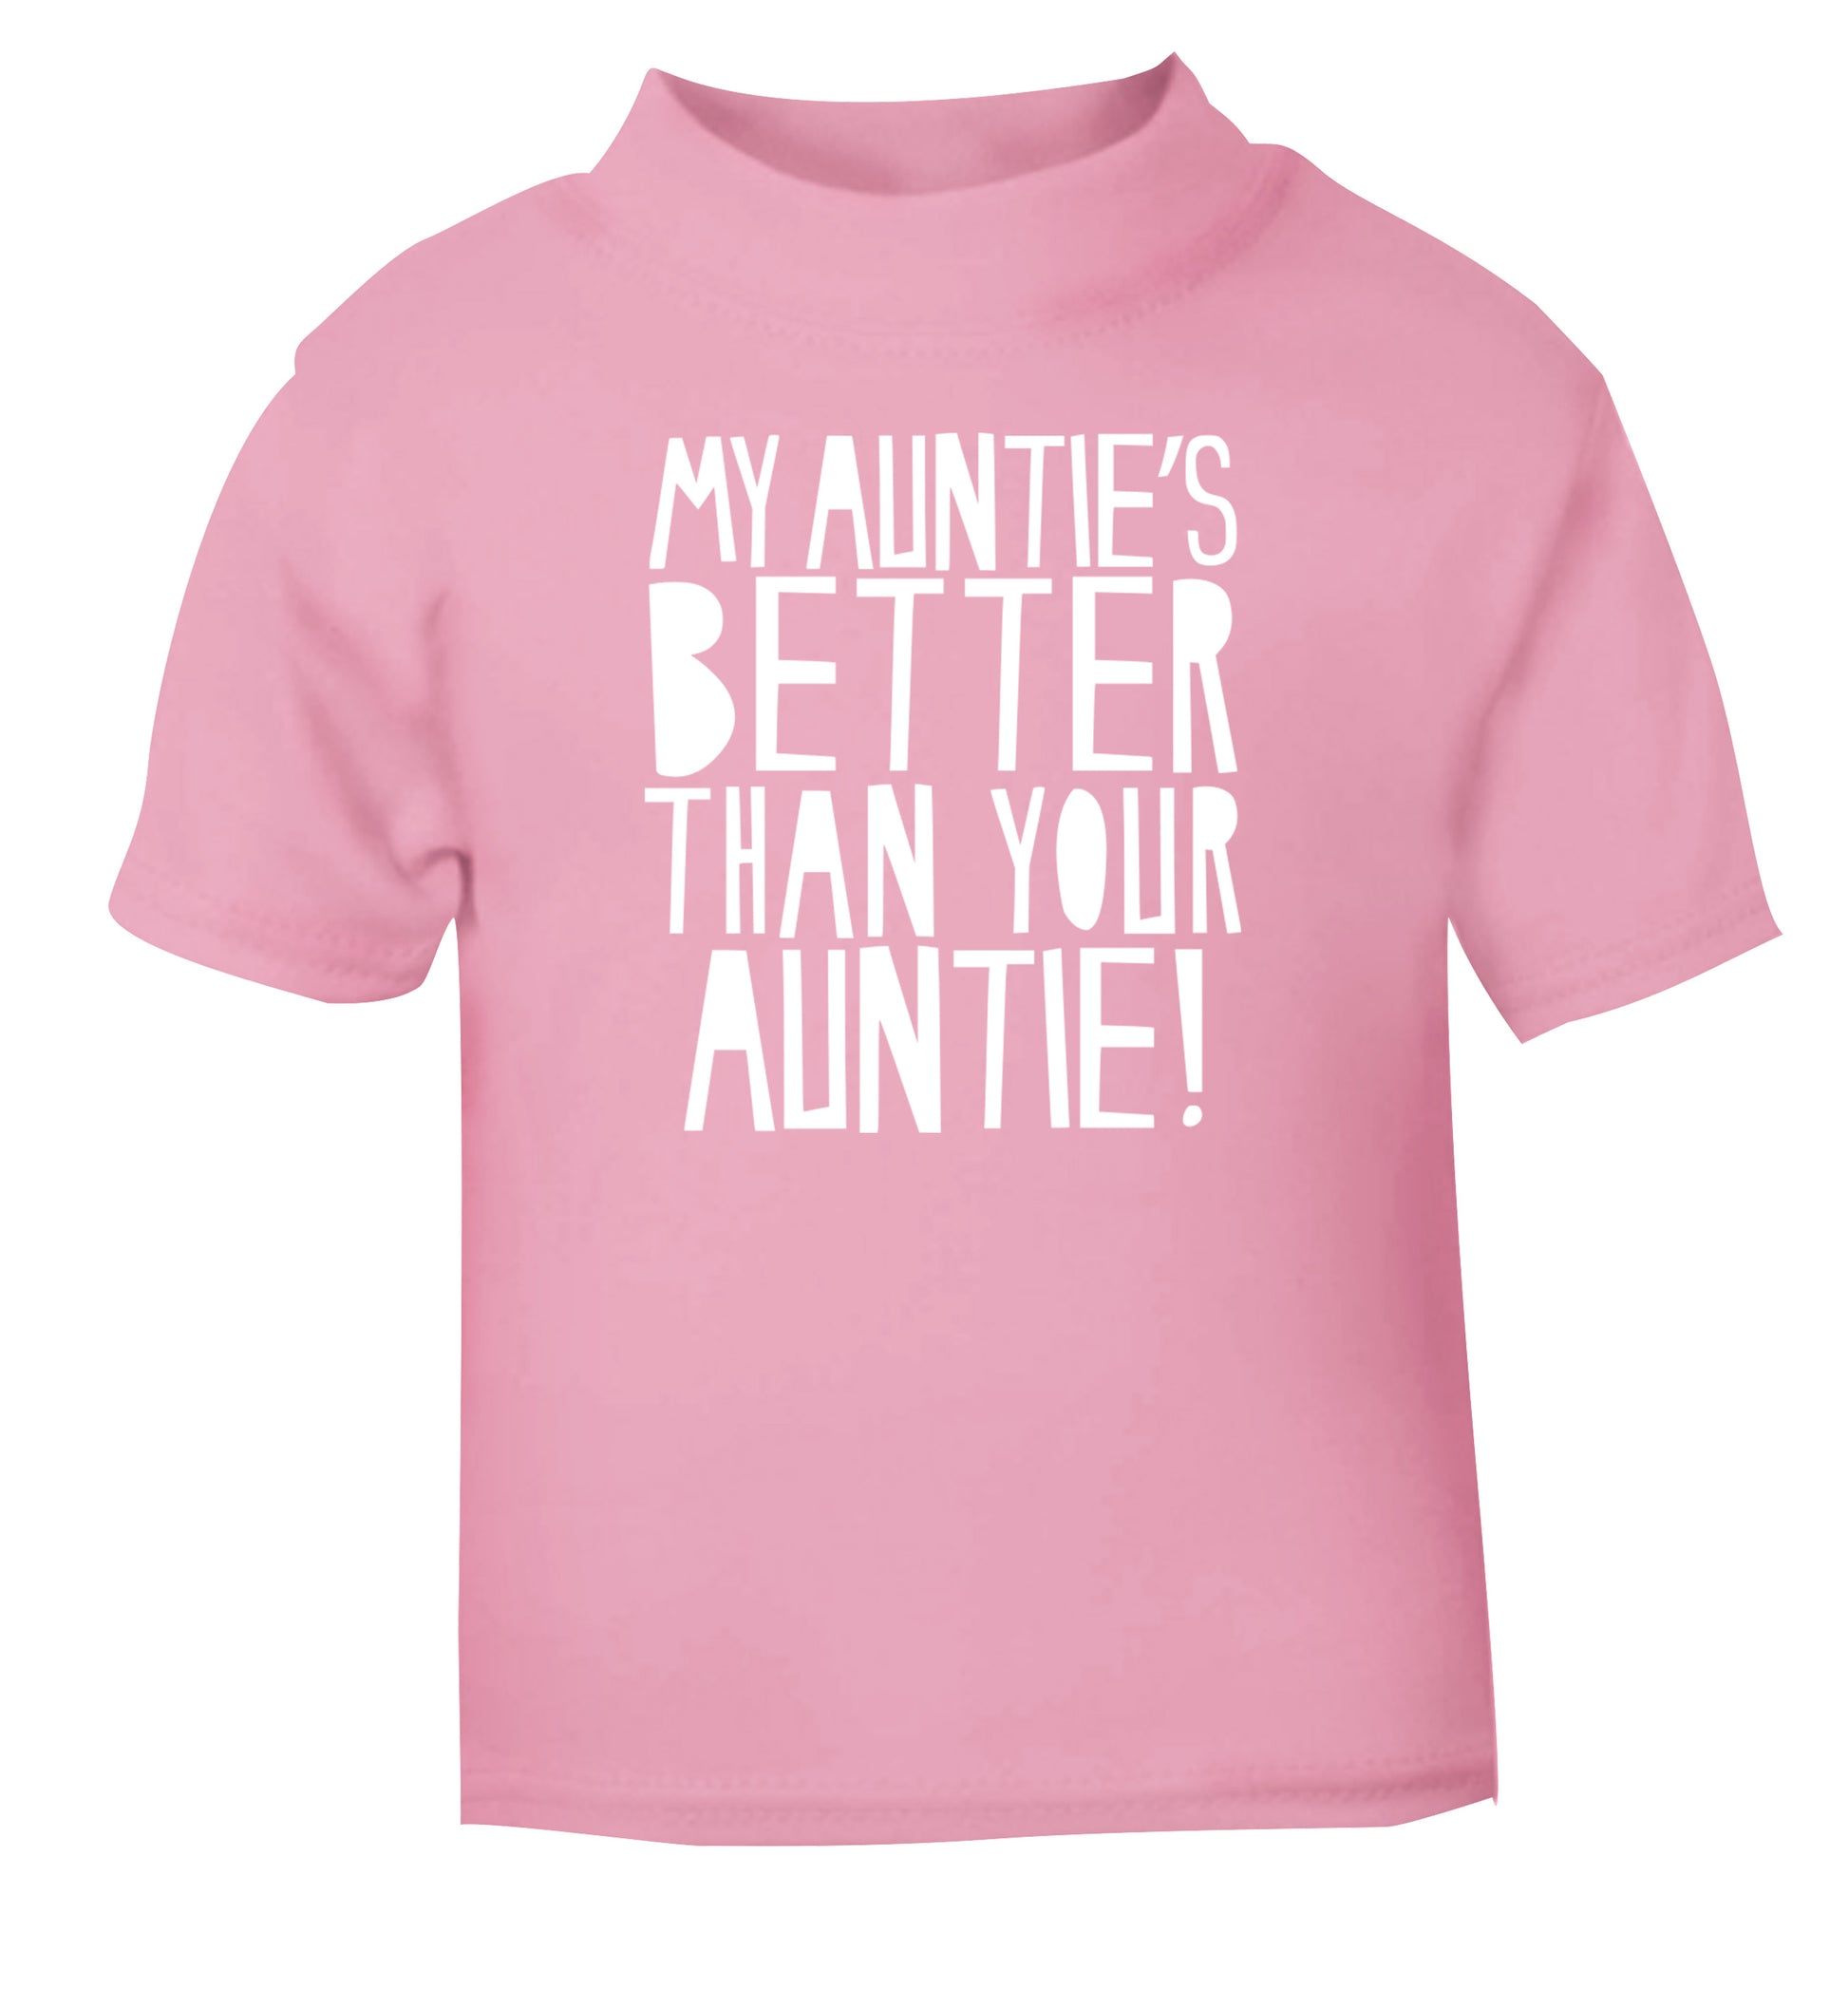 My auntie's better than your auntie light pink Baby Toddler Tshirt 2 Years